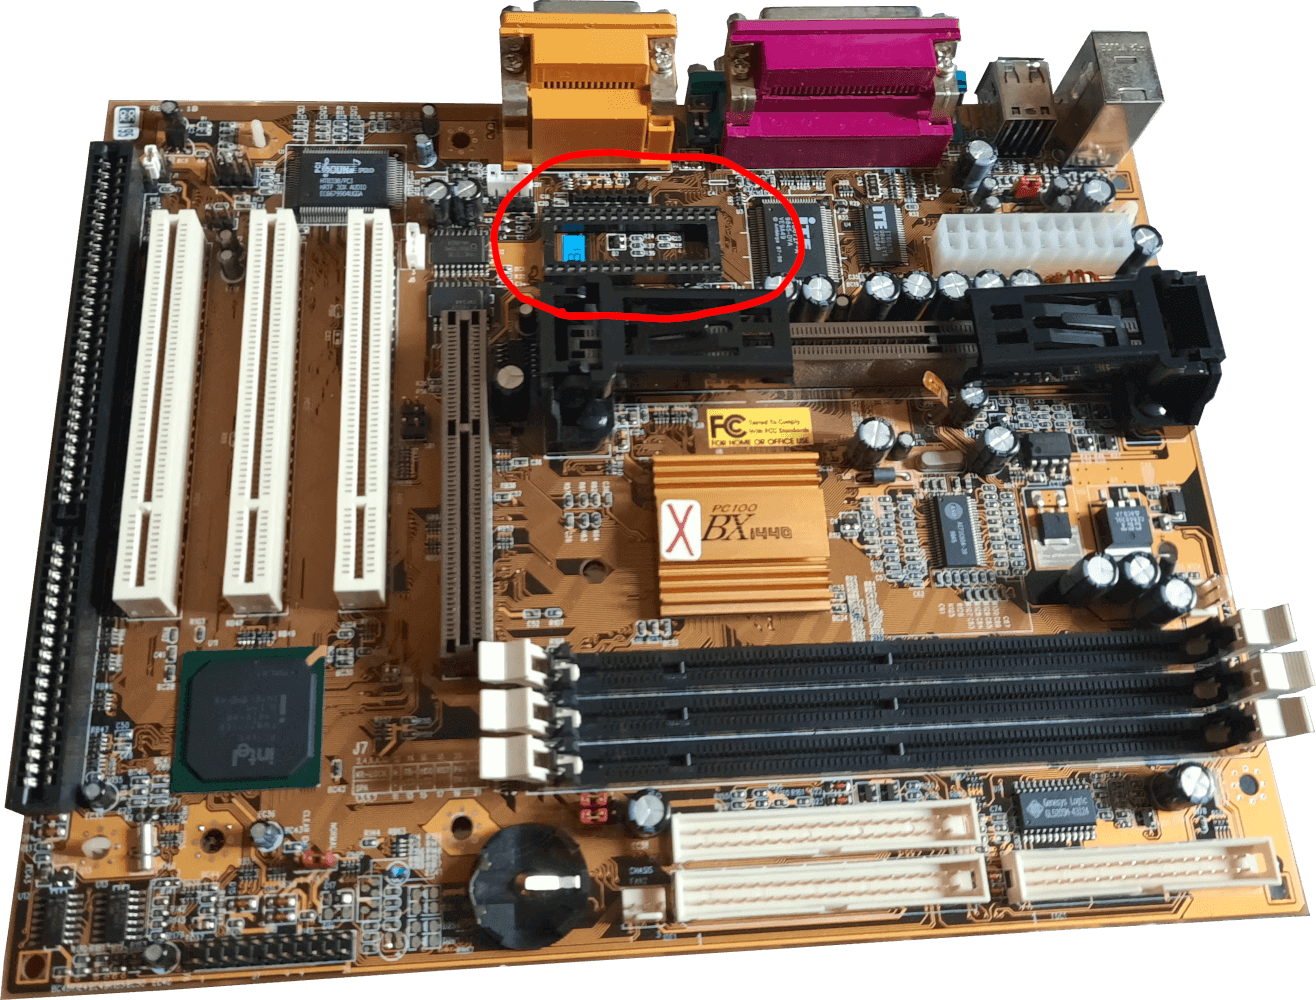 A picture of the motherboard with an empty socket circled in red.